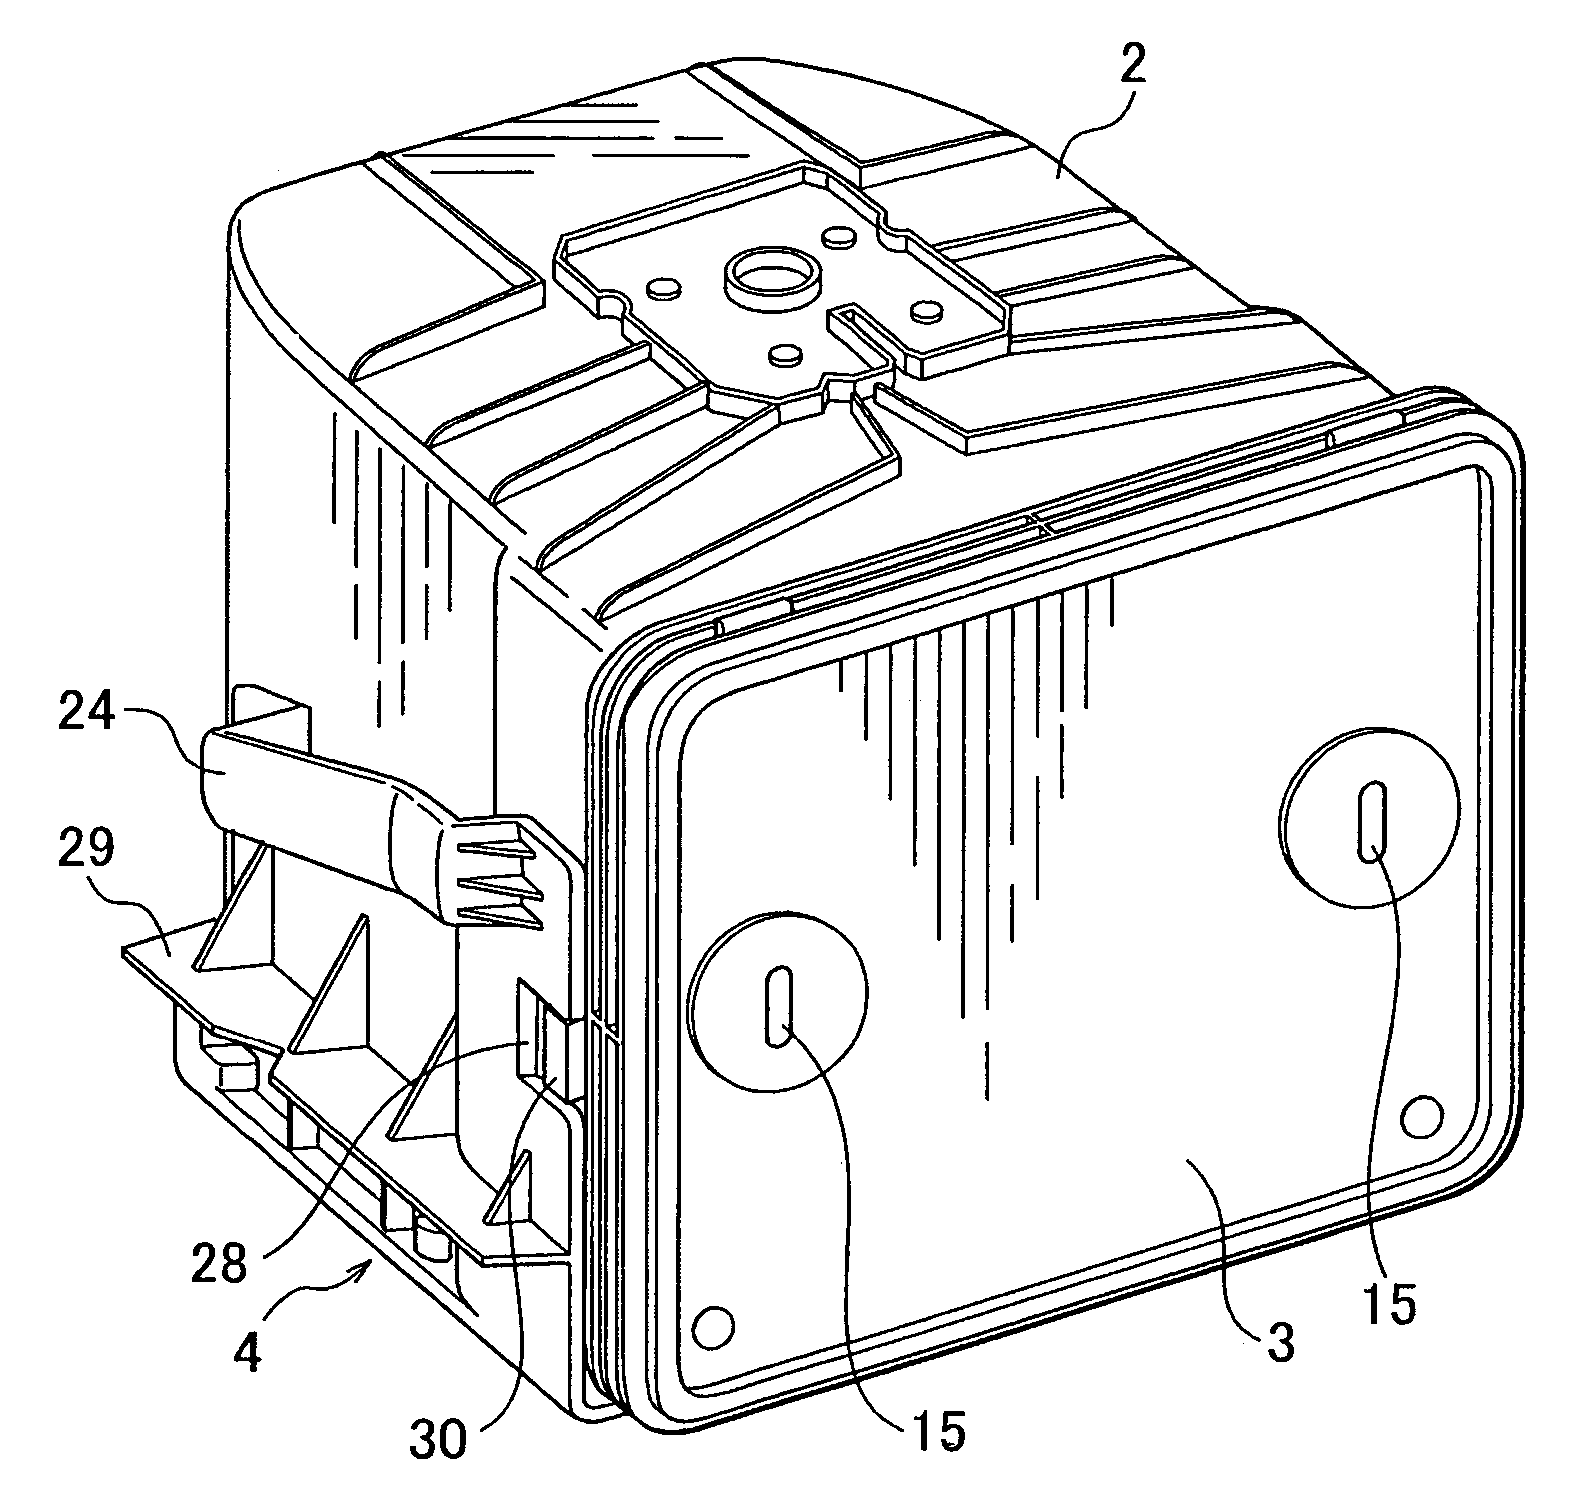 Thin plate storage container with handled supporting member